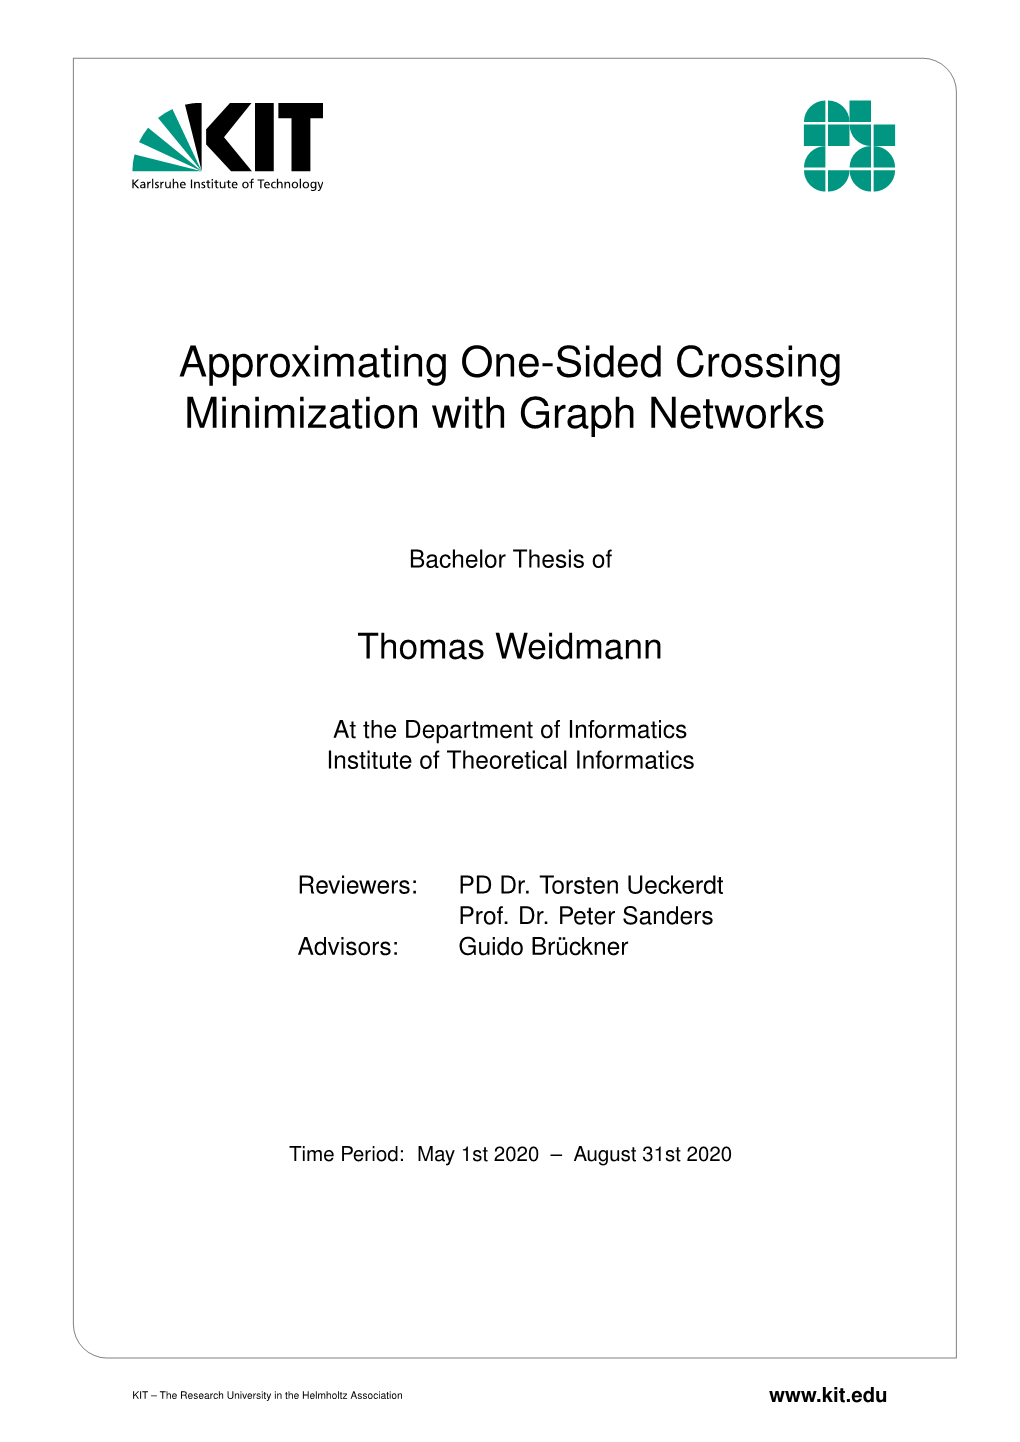 Approximating One-Sided Crossing Minimization with Graph Networks